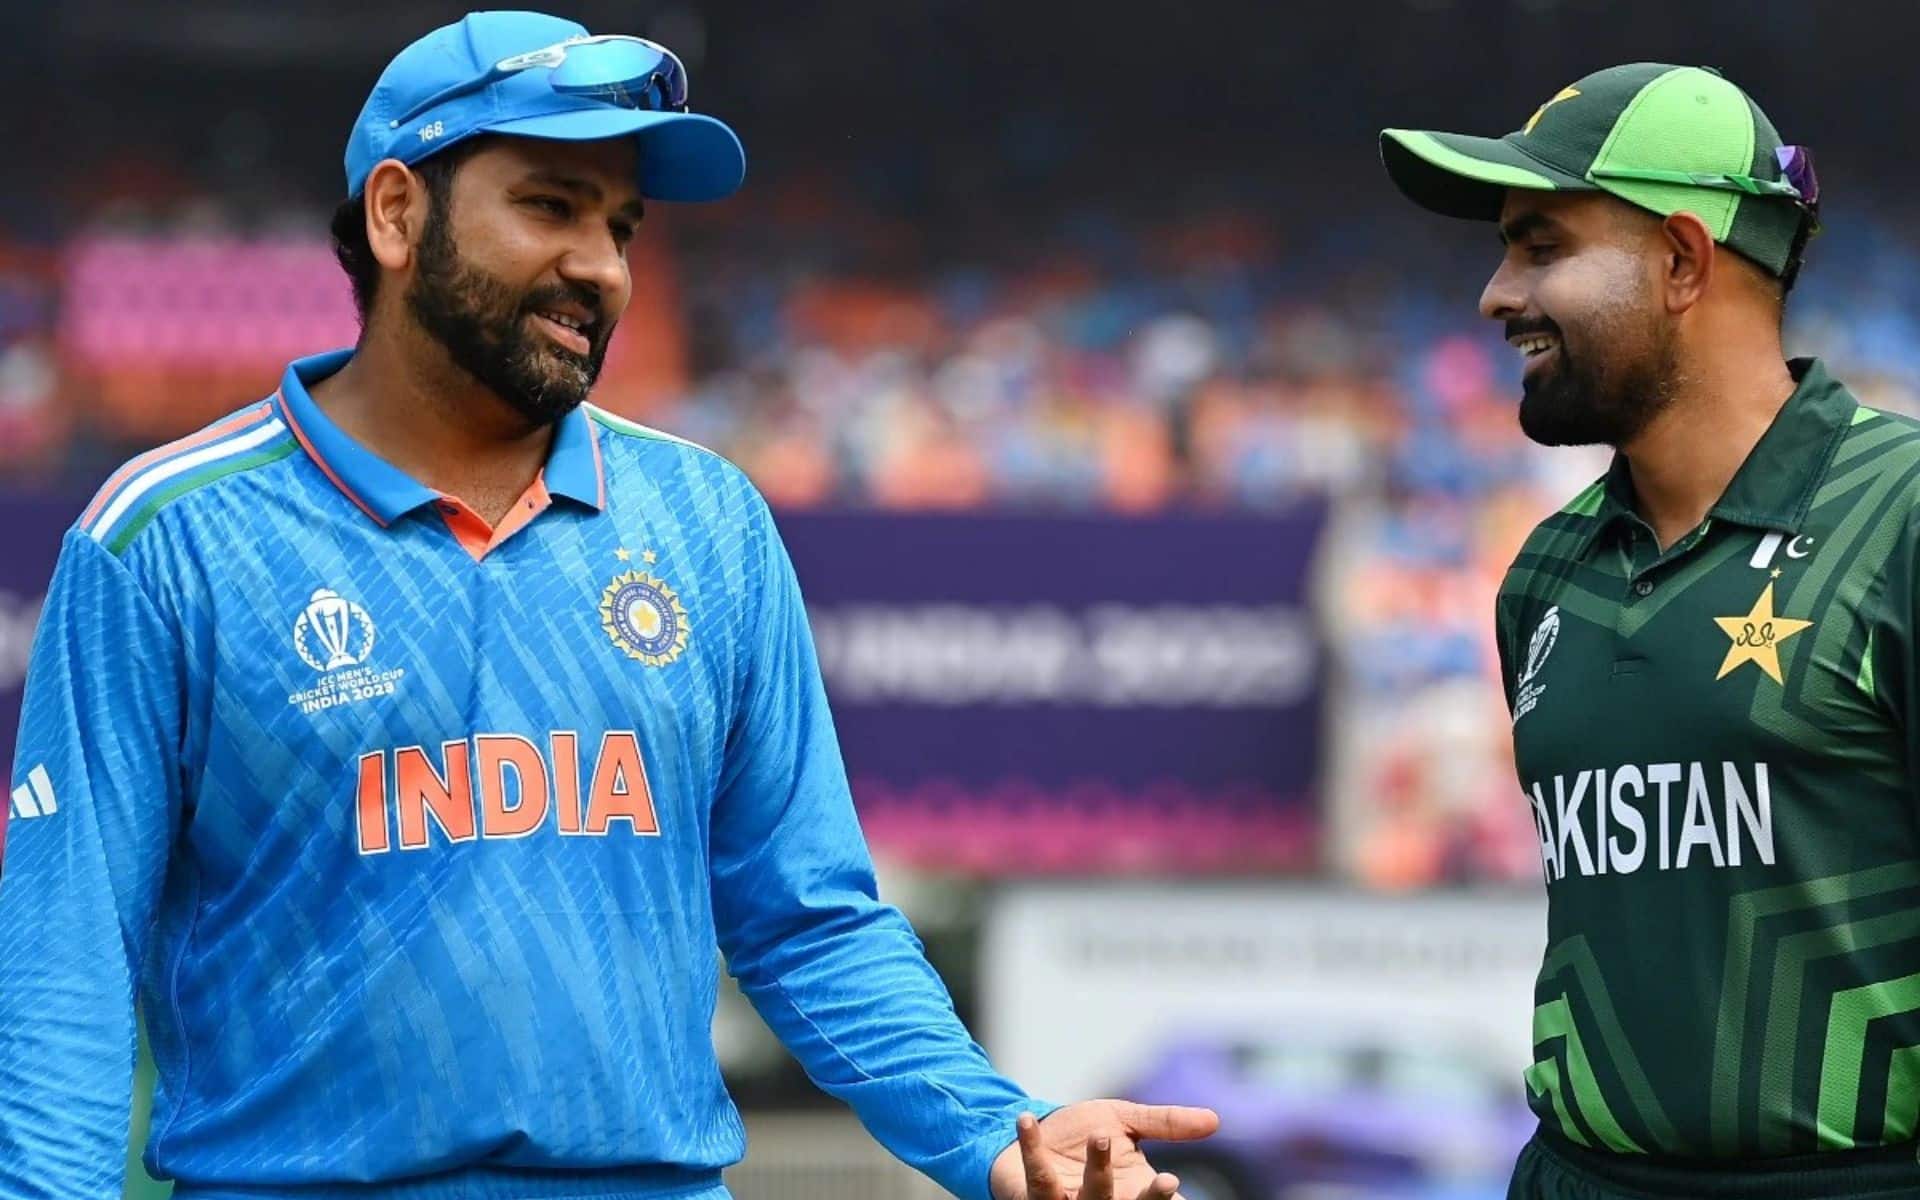 Pakistan is scheduled to face India on June 9th in New York [x.com]